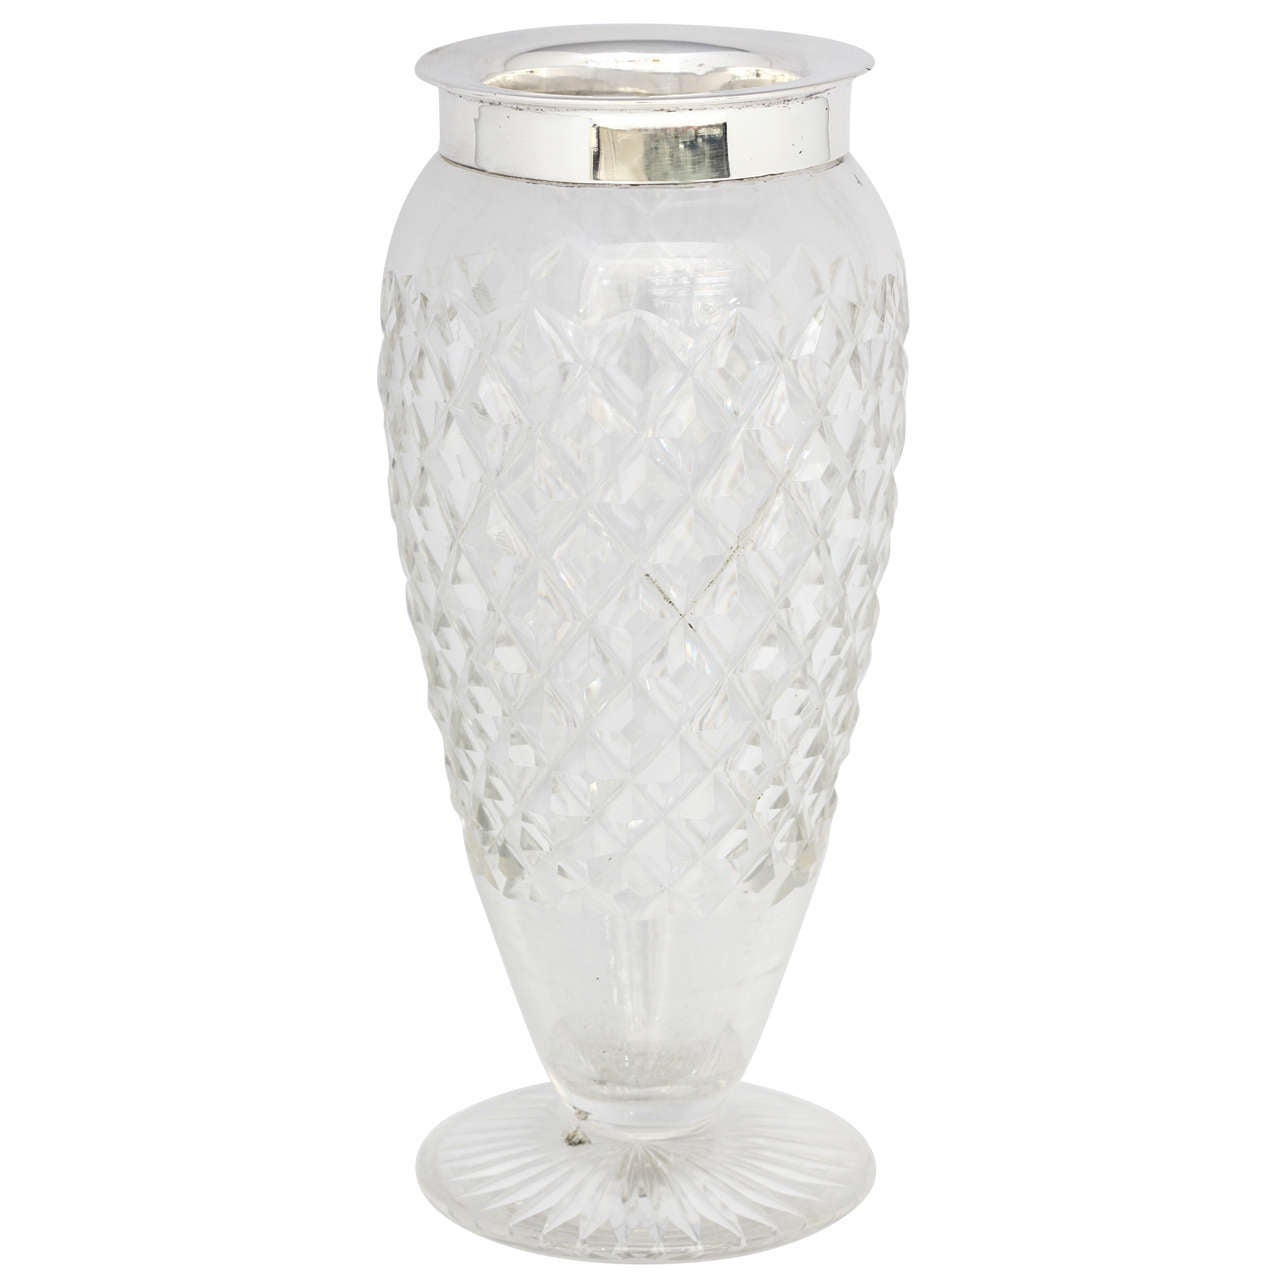 Sterling Silver-Mounted Cut Crystal Vase